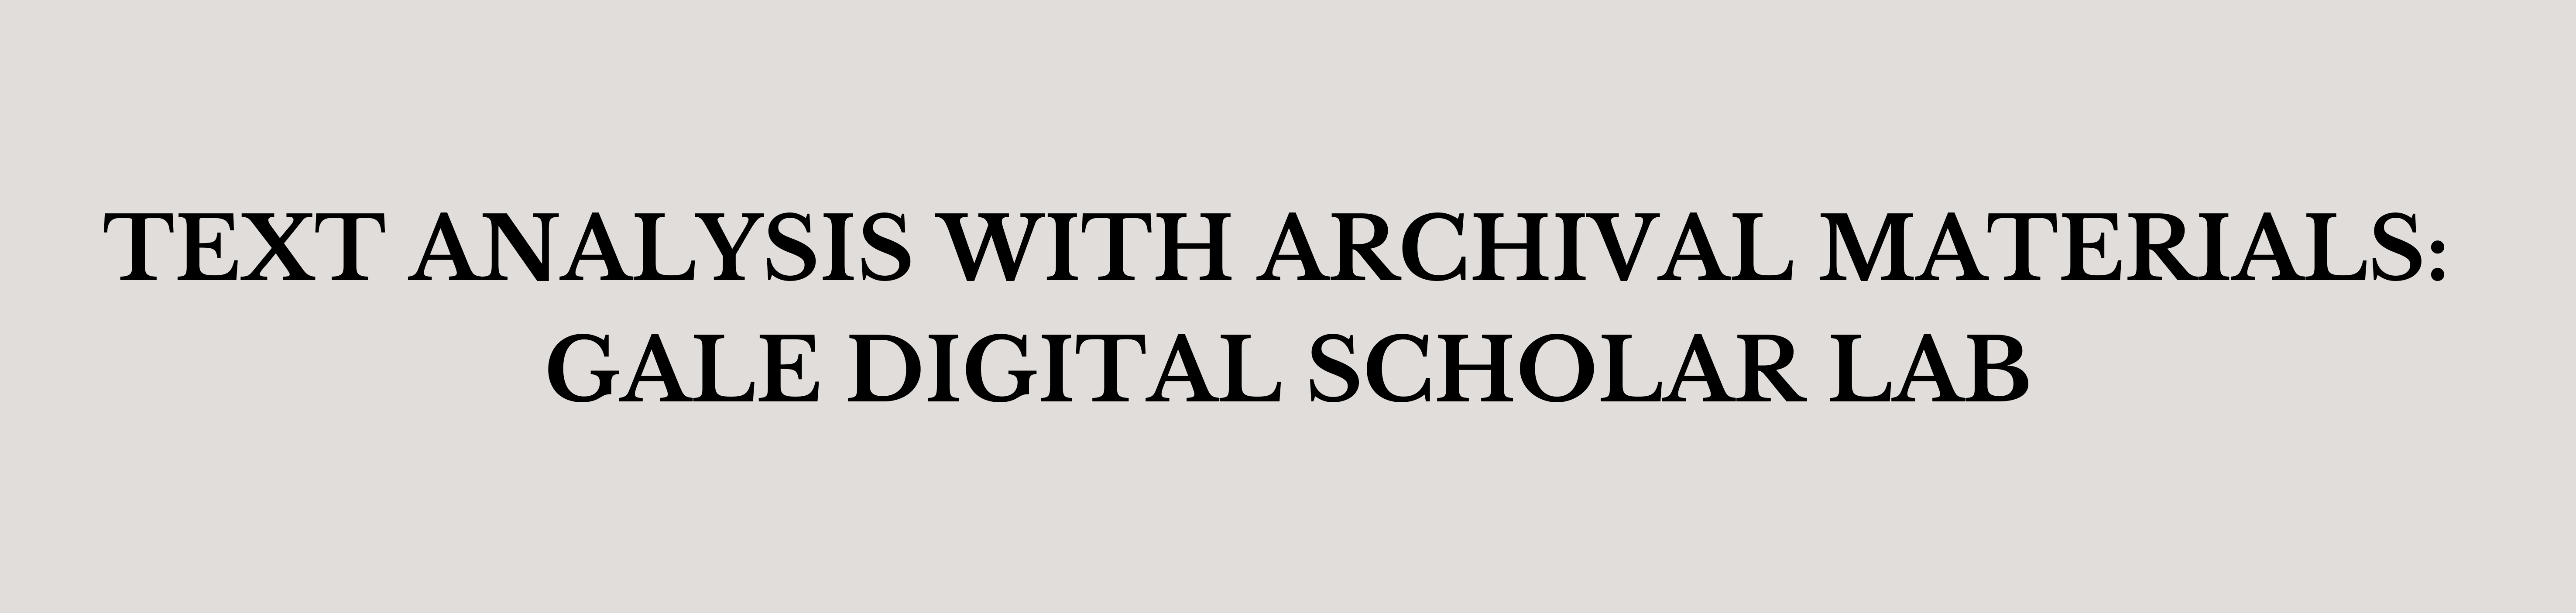 Text Analysis with Archival Materials: Gale Digital Scholar Lab